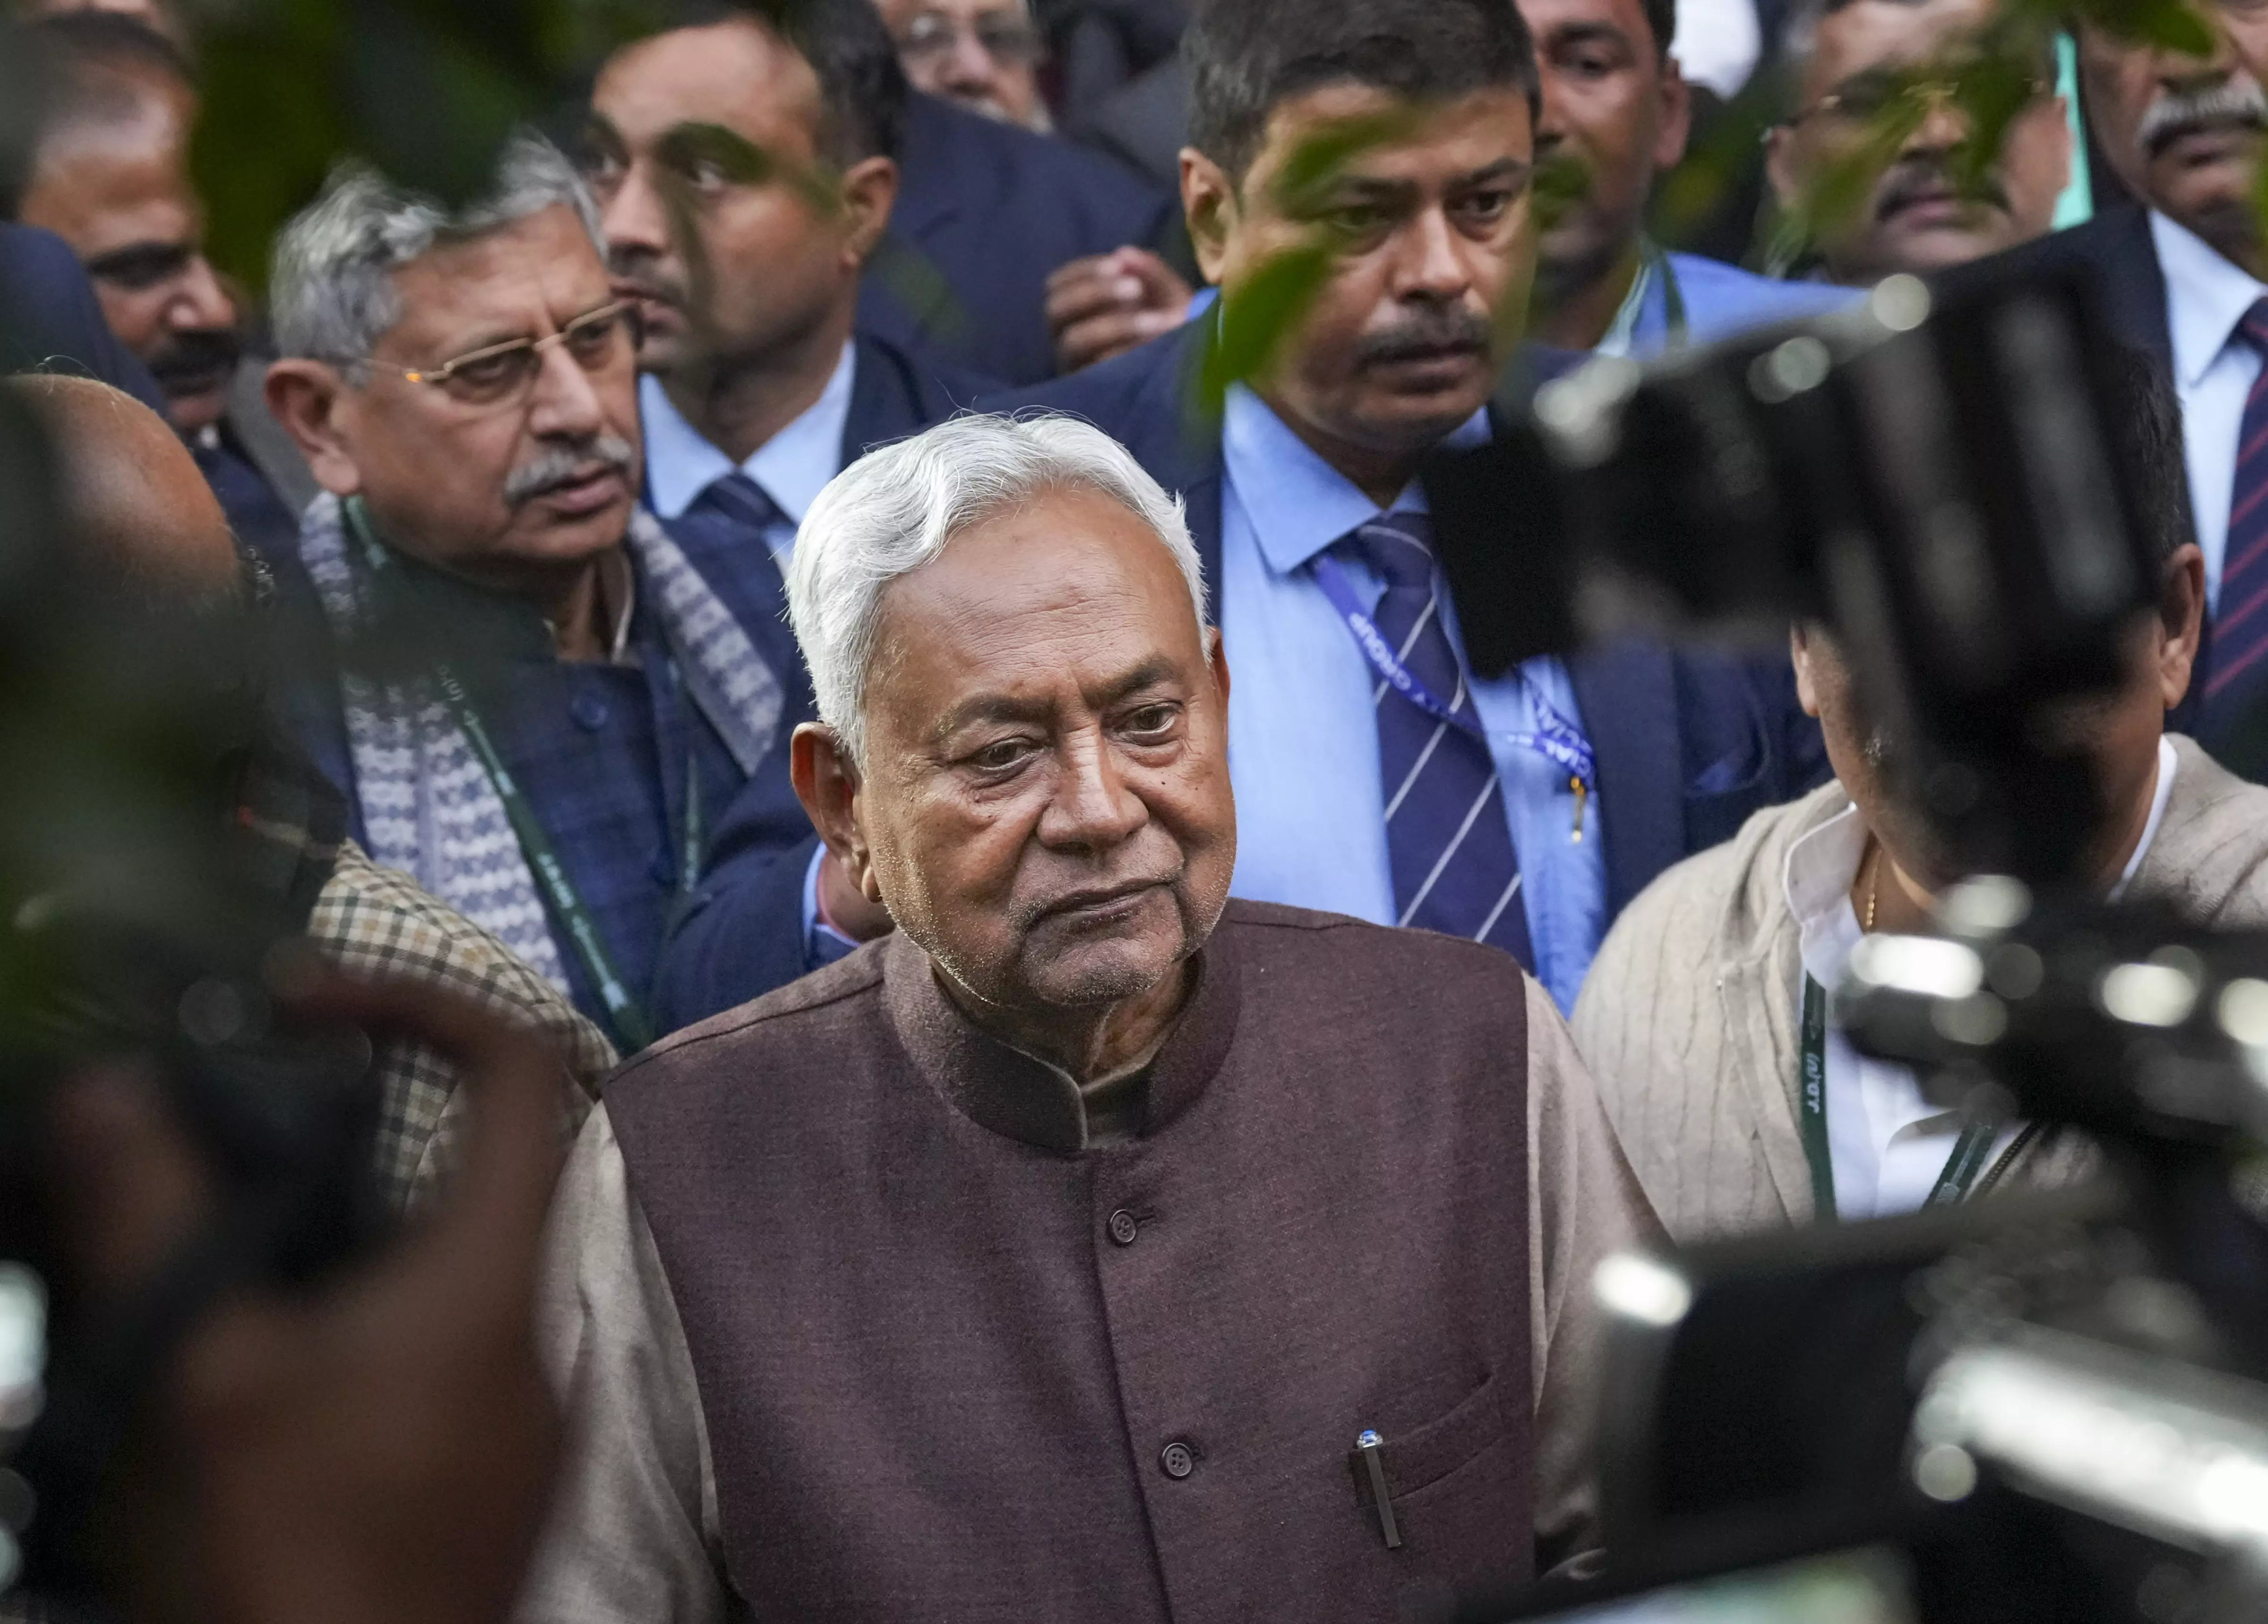 WHATS ON HIS MIND? Bihar Chief Minister Nitish Kumar after the JD(U) national council meeting in New Delhi on Friday. PTI Photo